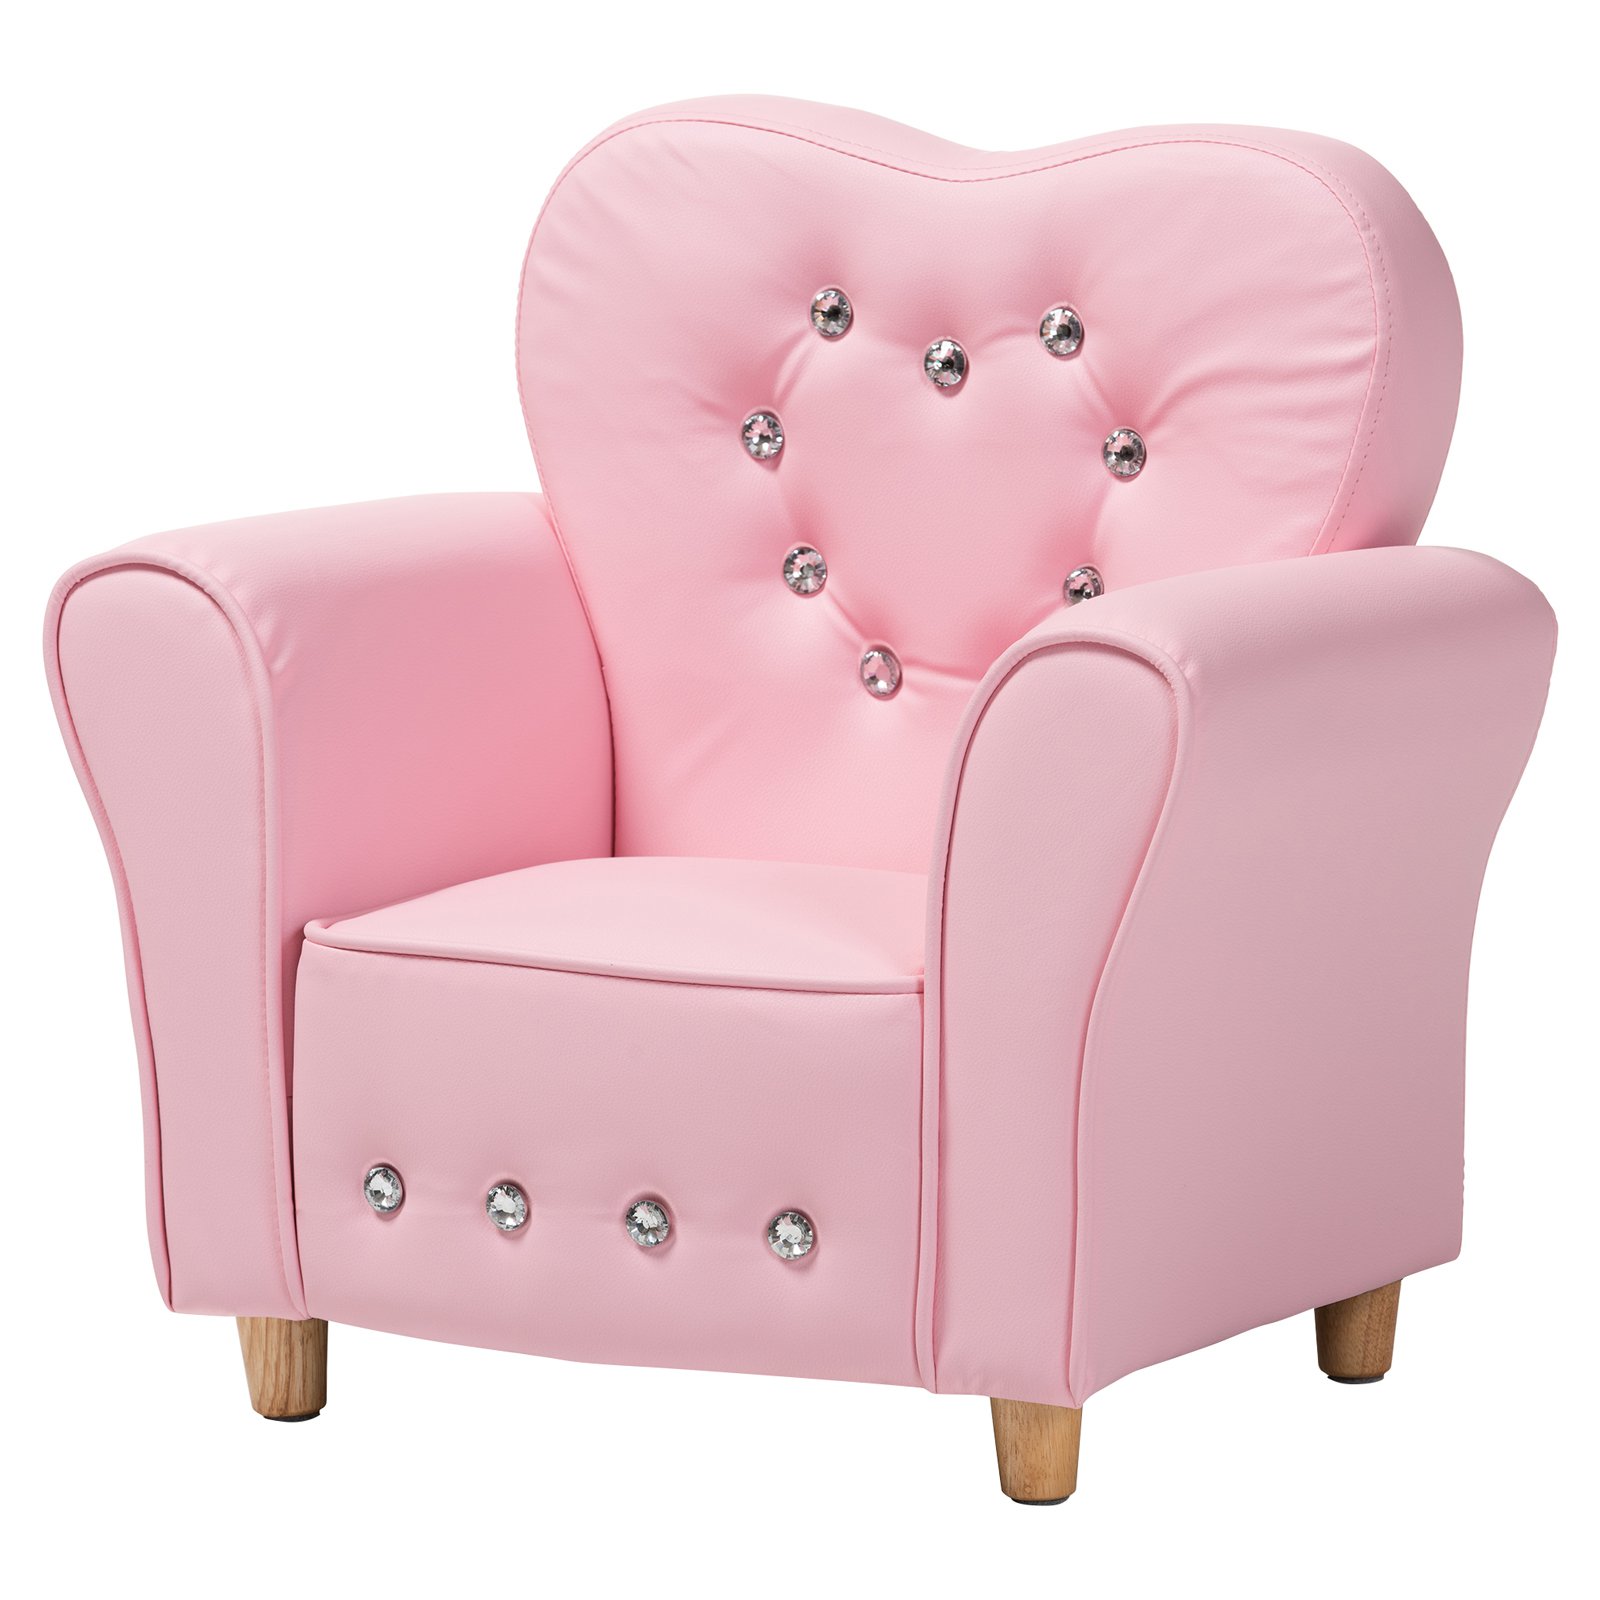 Baxton Studio Mabel Modern and Contemporary Pink Faux Leather Kids Armchair - image 1 of 8